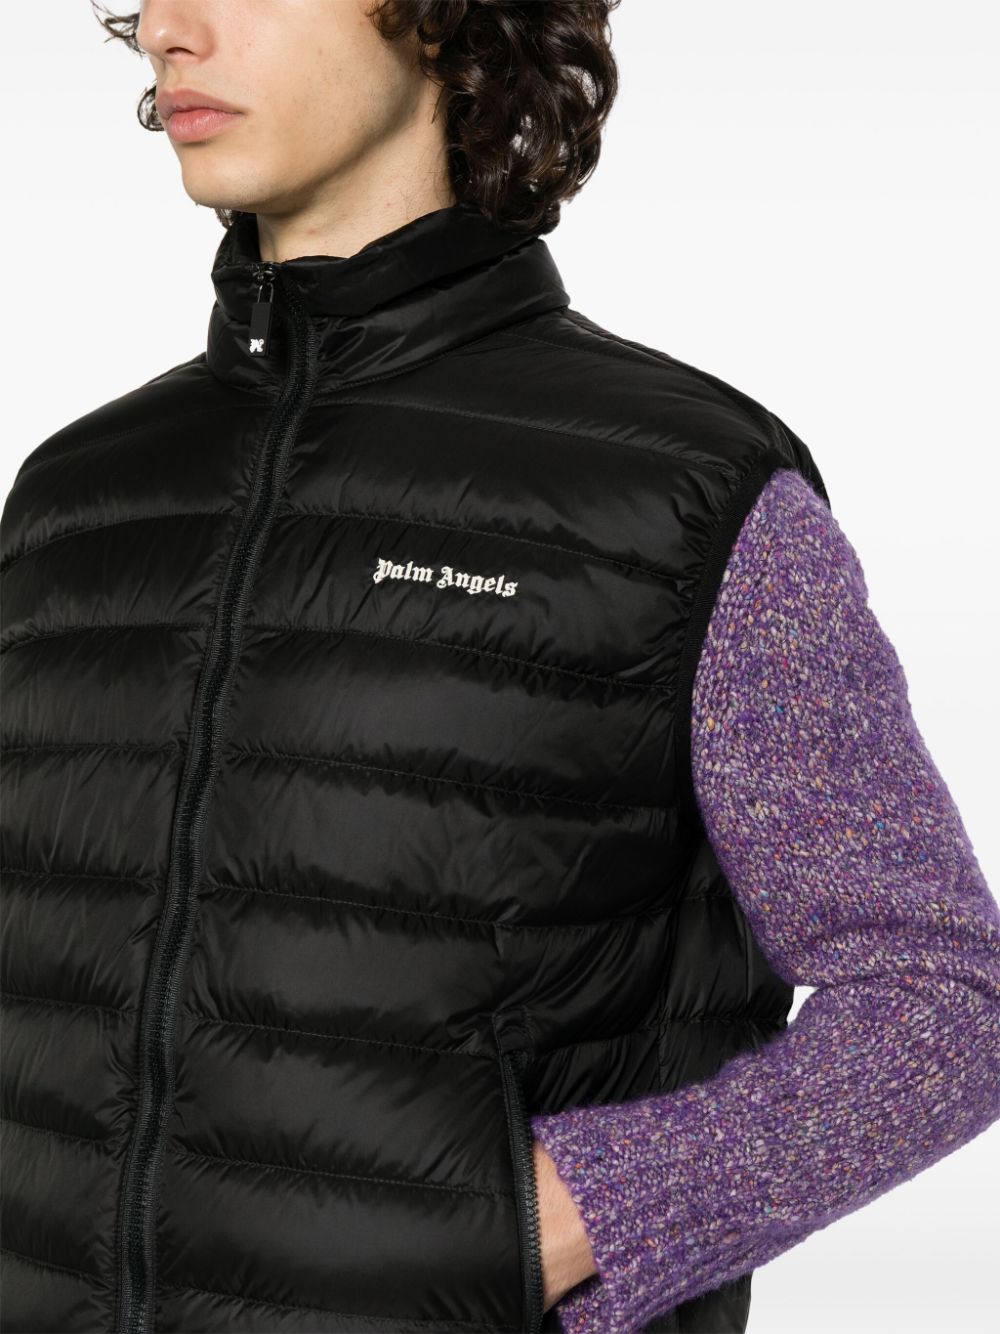 Padded vest with print